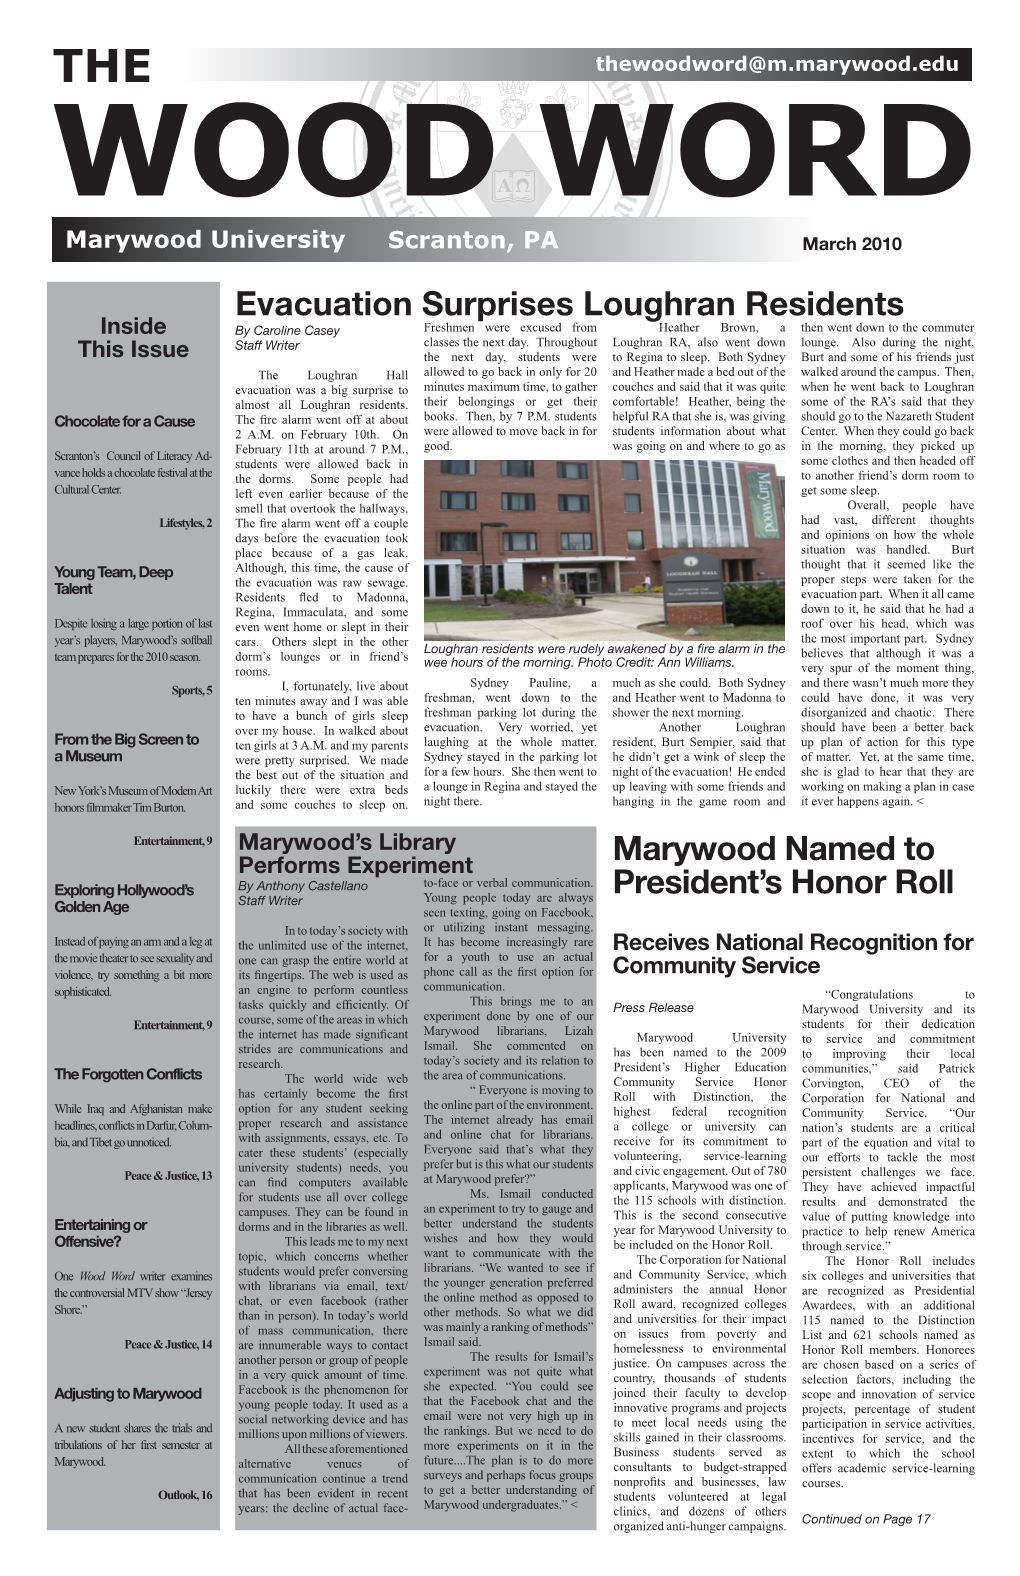 Evacuation Surprises Loughran Residents Marywood Named to President's Honor Roll